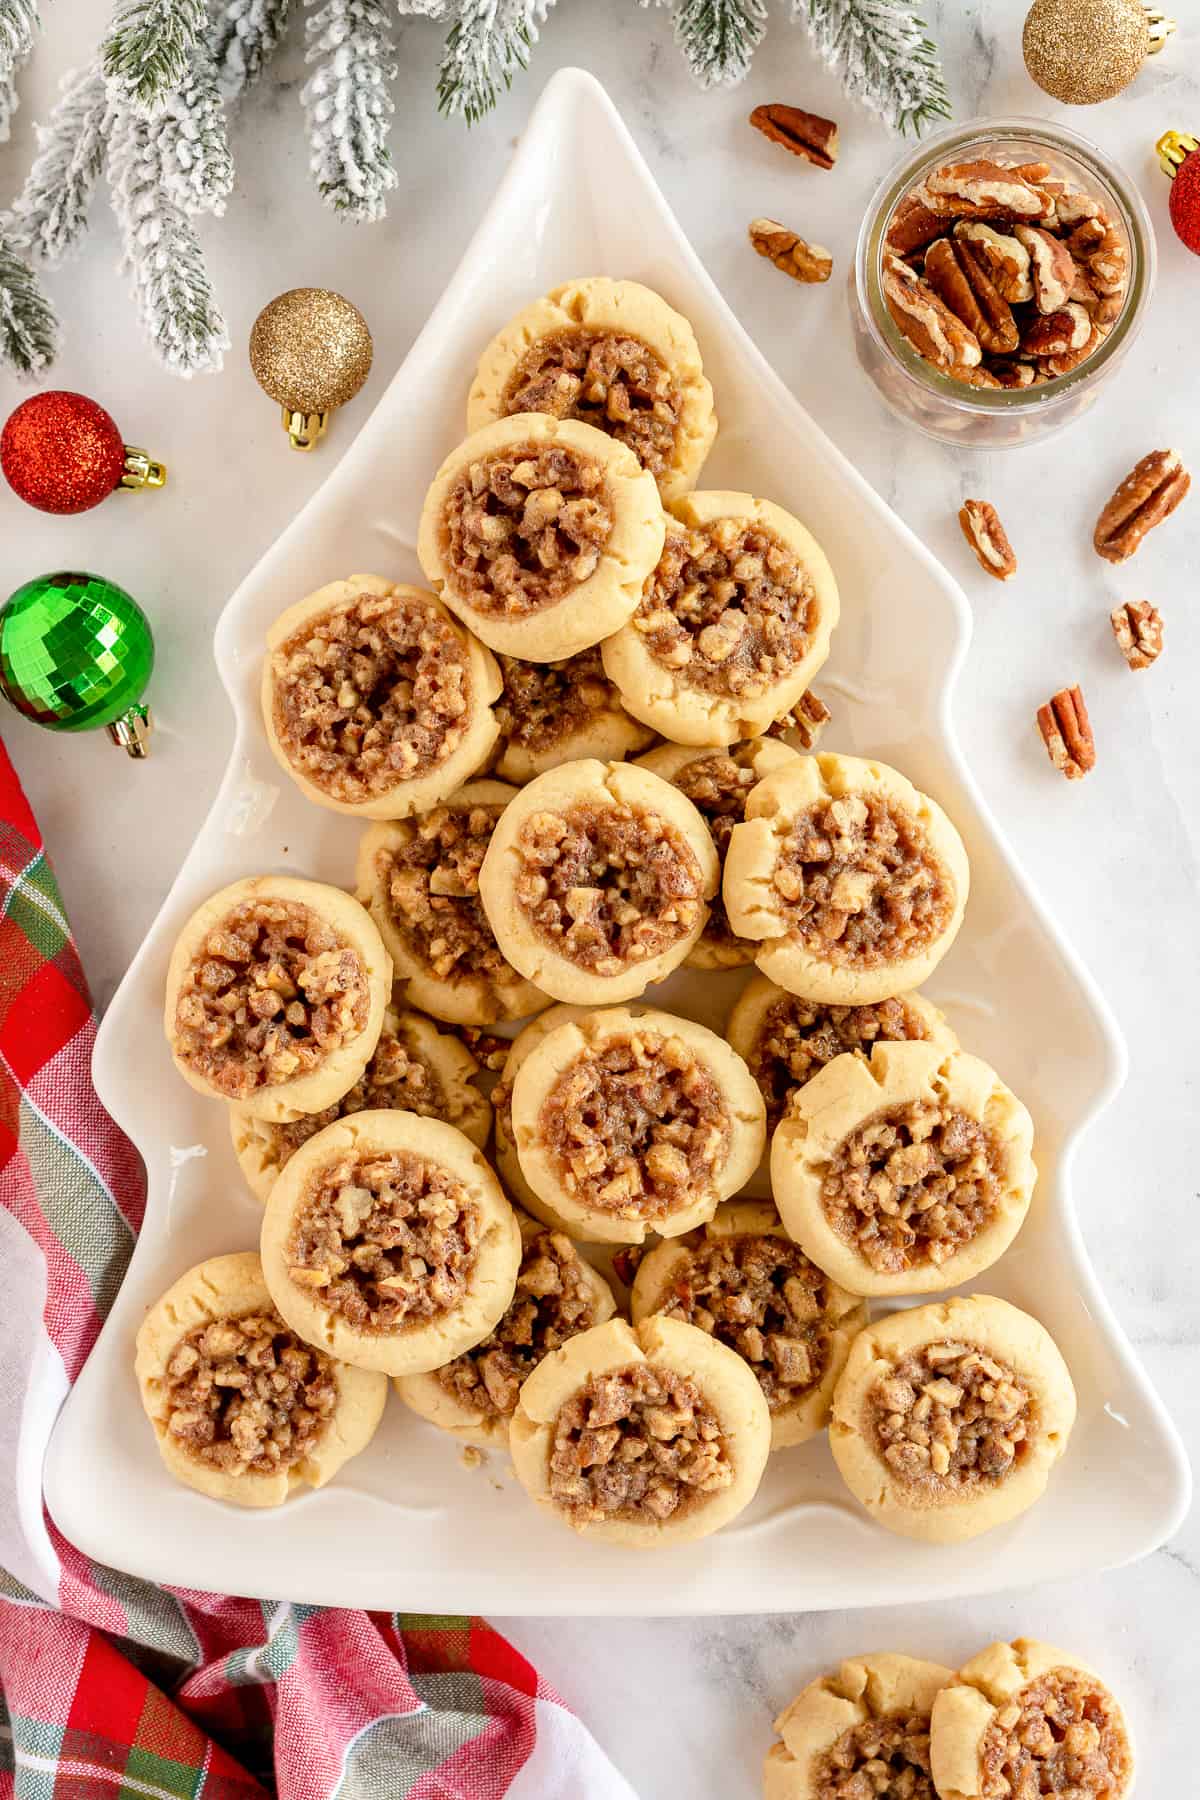 Pecan Pie Thumbprint Cookies on a Christmas tree shaped platter surrounded by ornaments.